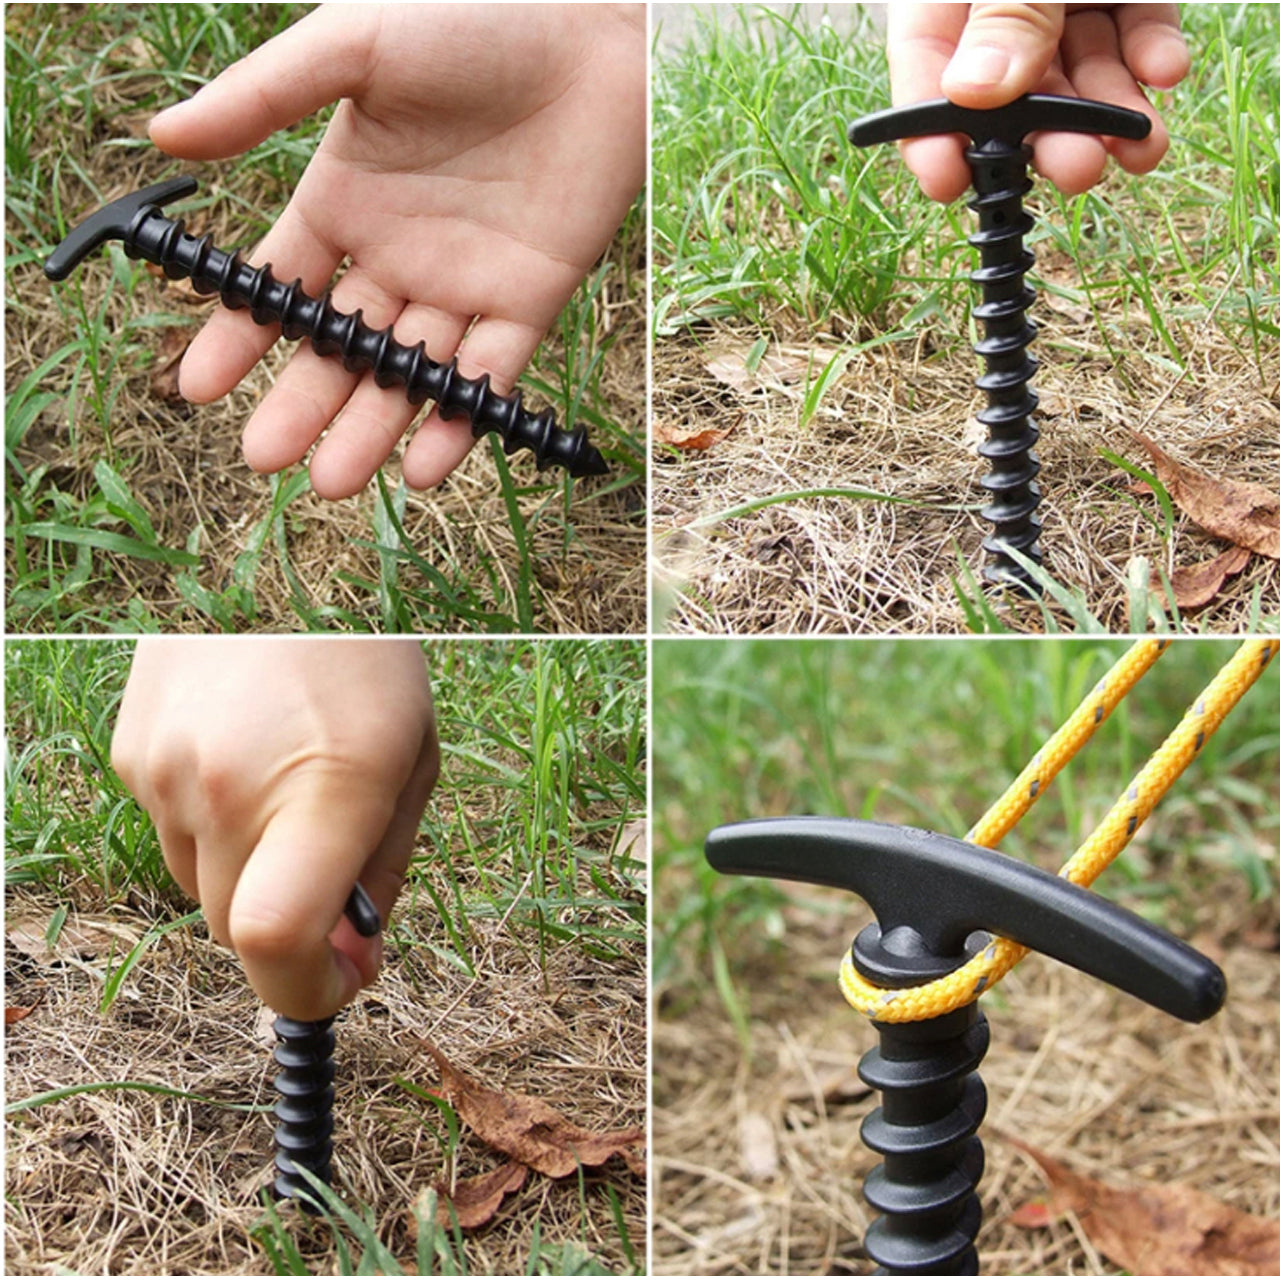 5 pack screw into the ground tent pegs are great for military, cadets, camping and other outdoor activities.  These stake pegs are good for supporting hootchies, tarps and other support shelters.  Material: ABS  Size: 14.5cm x 7cm  x5 in each pack www.defenceqstore.com.au